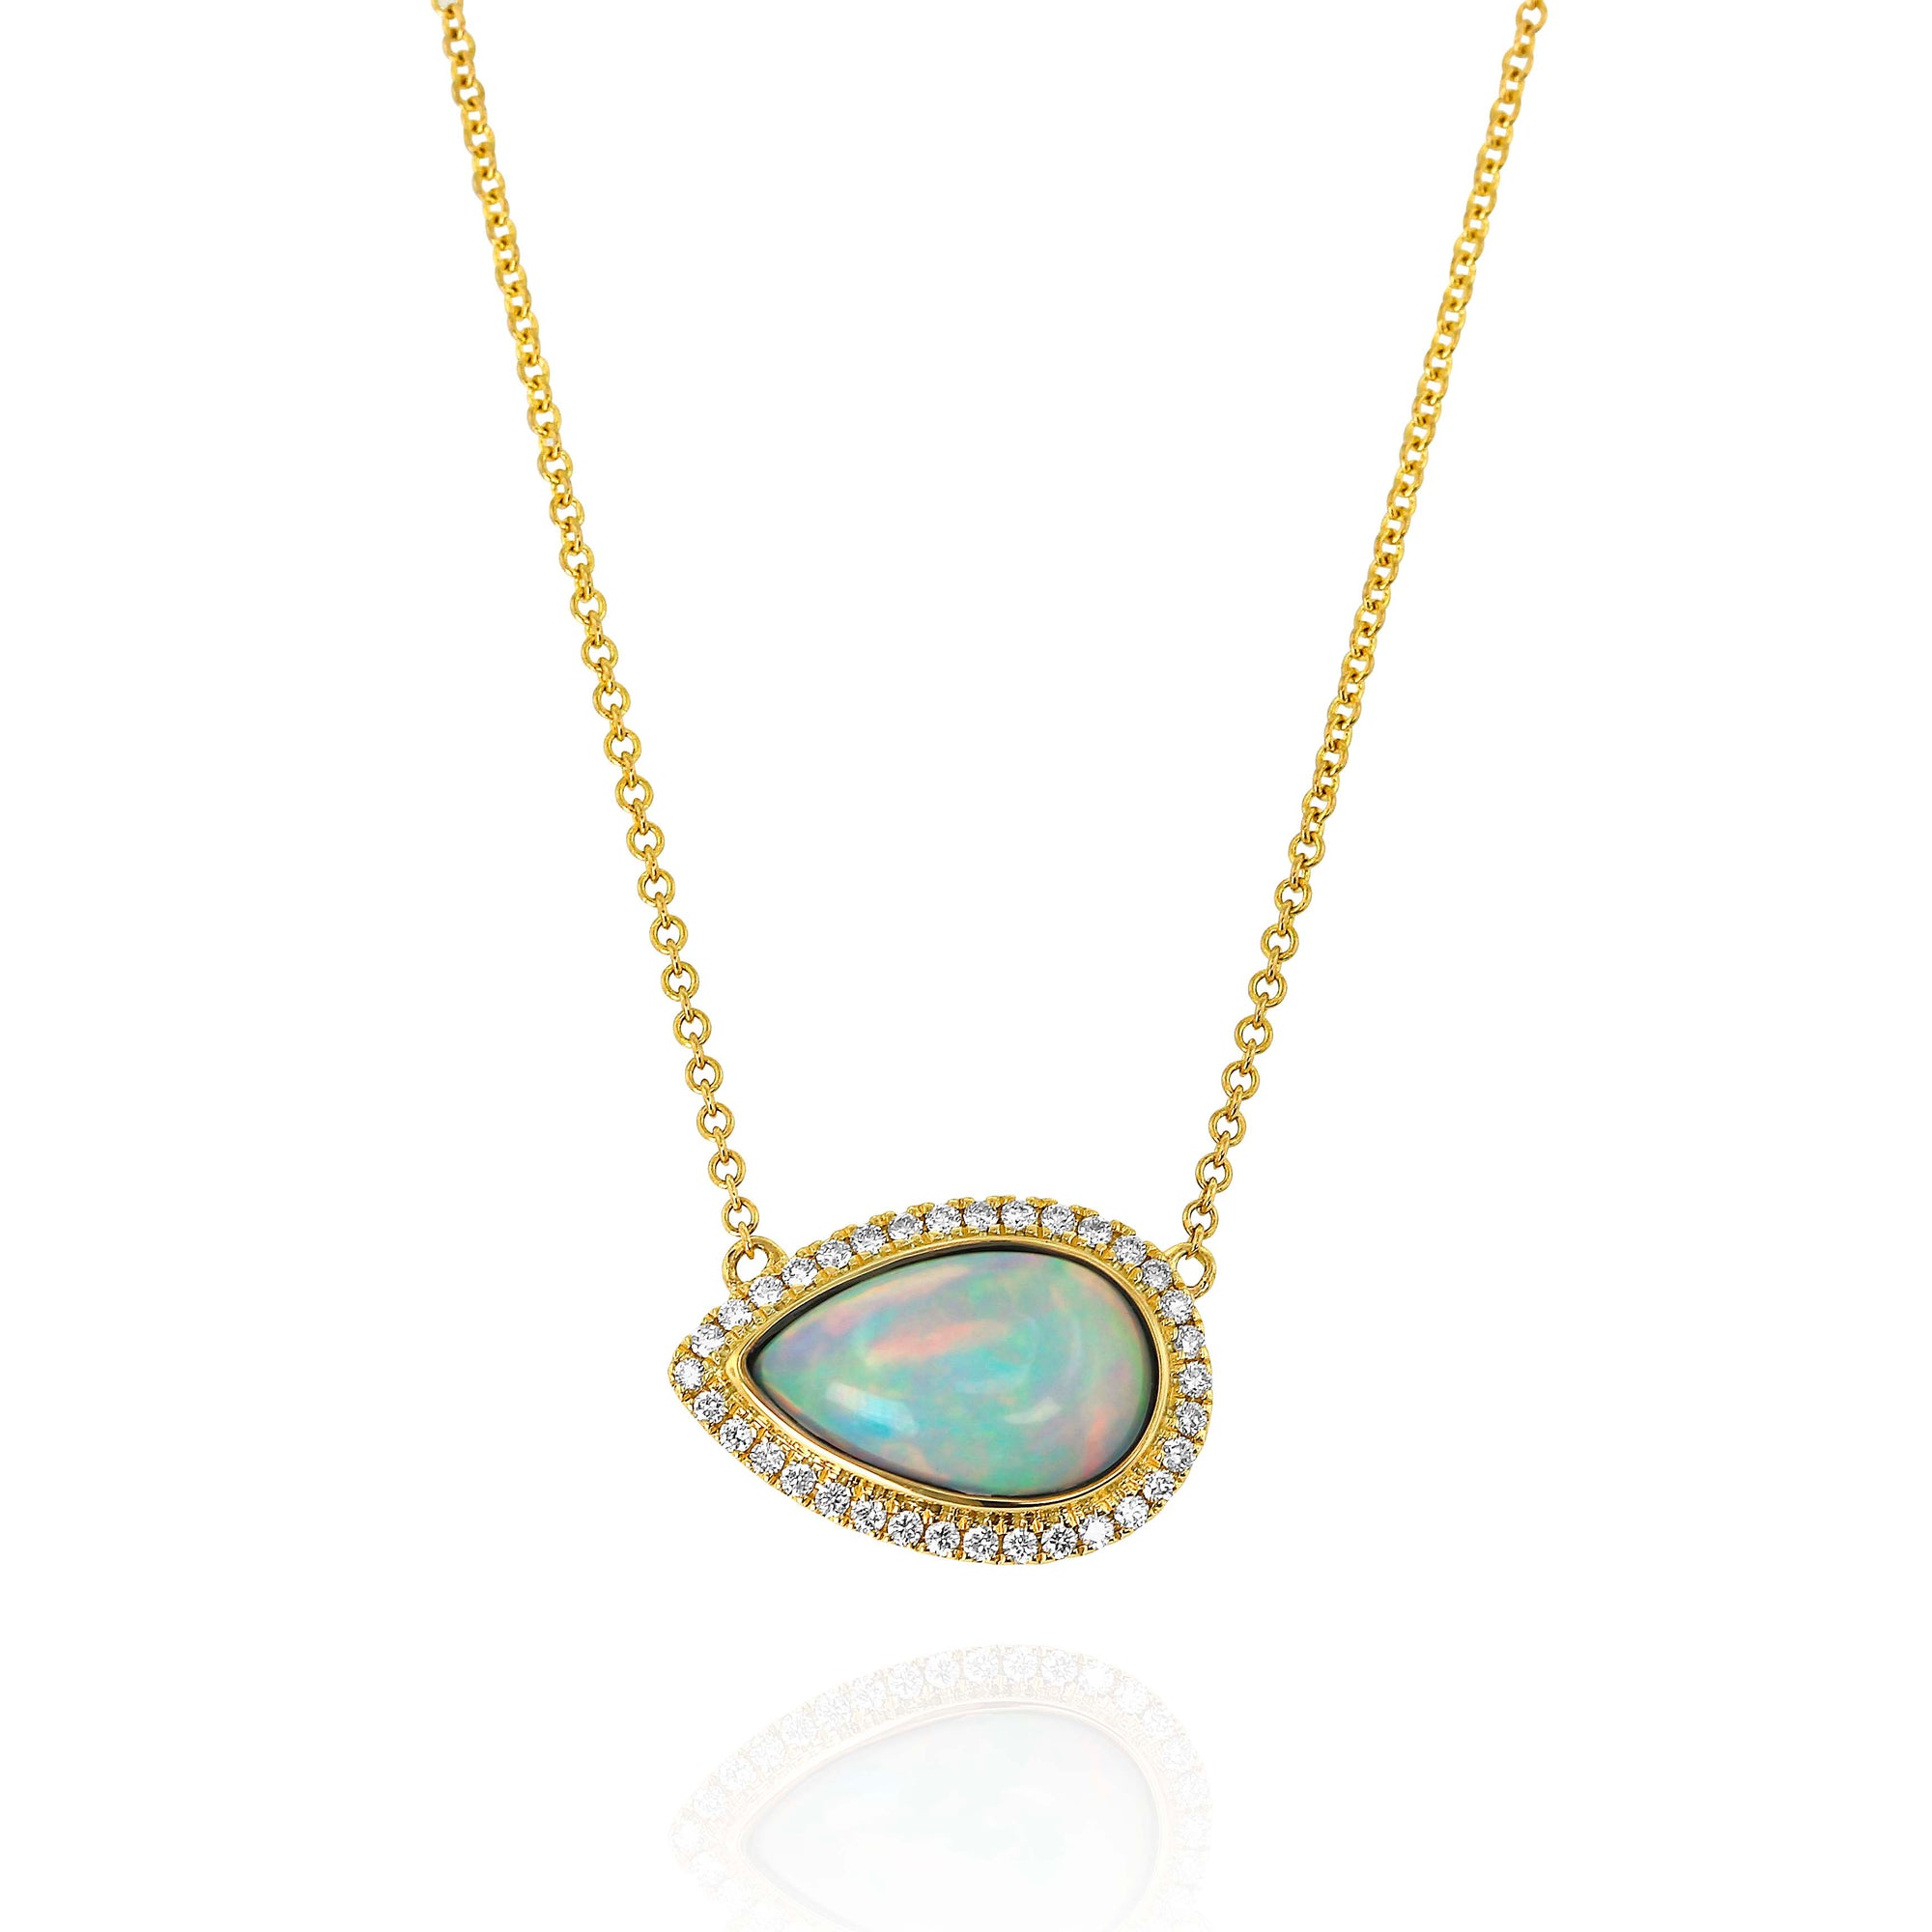 Pear-Shaped White Opal Necklace by Yael - Yellow Gold - Talisman Collection Fine Jewelers